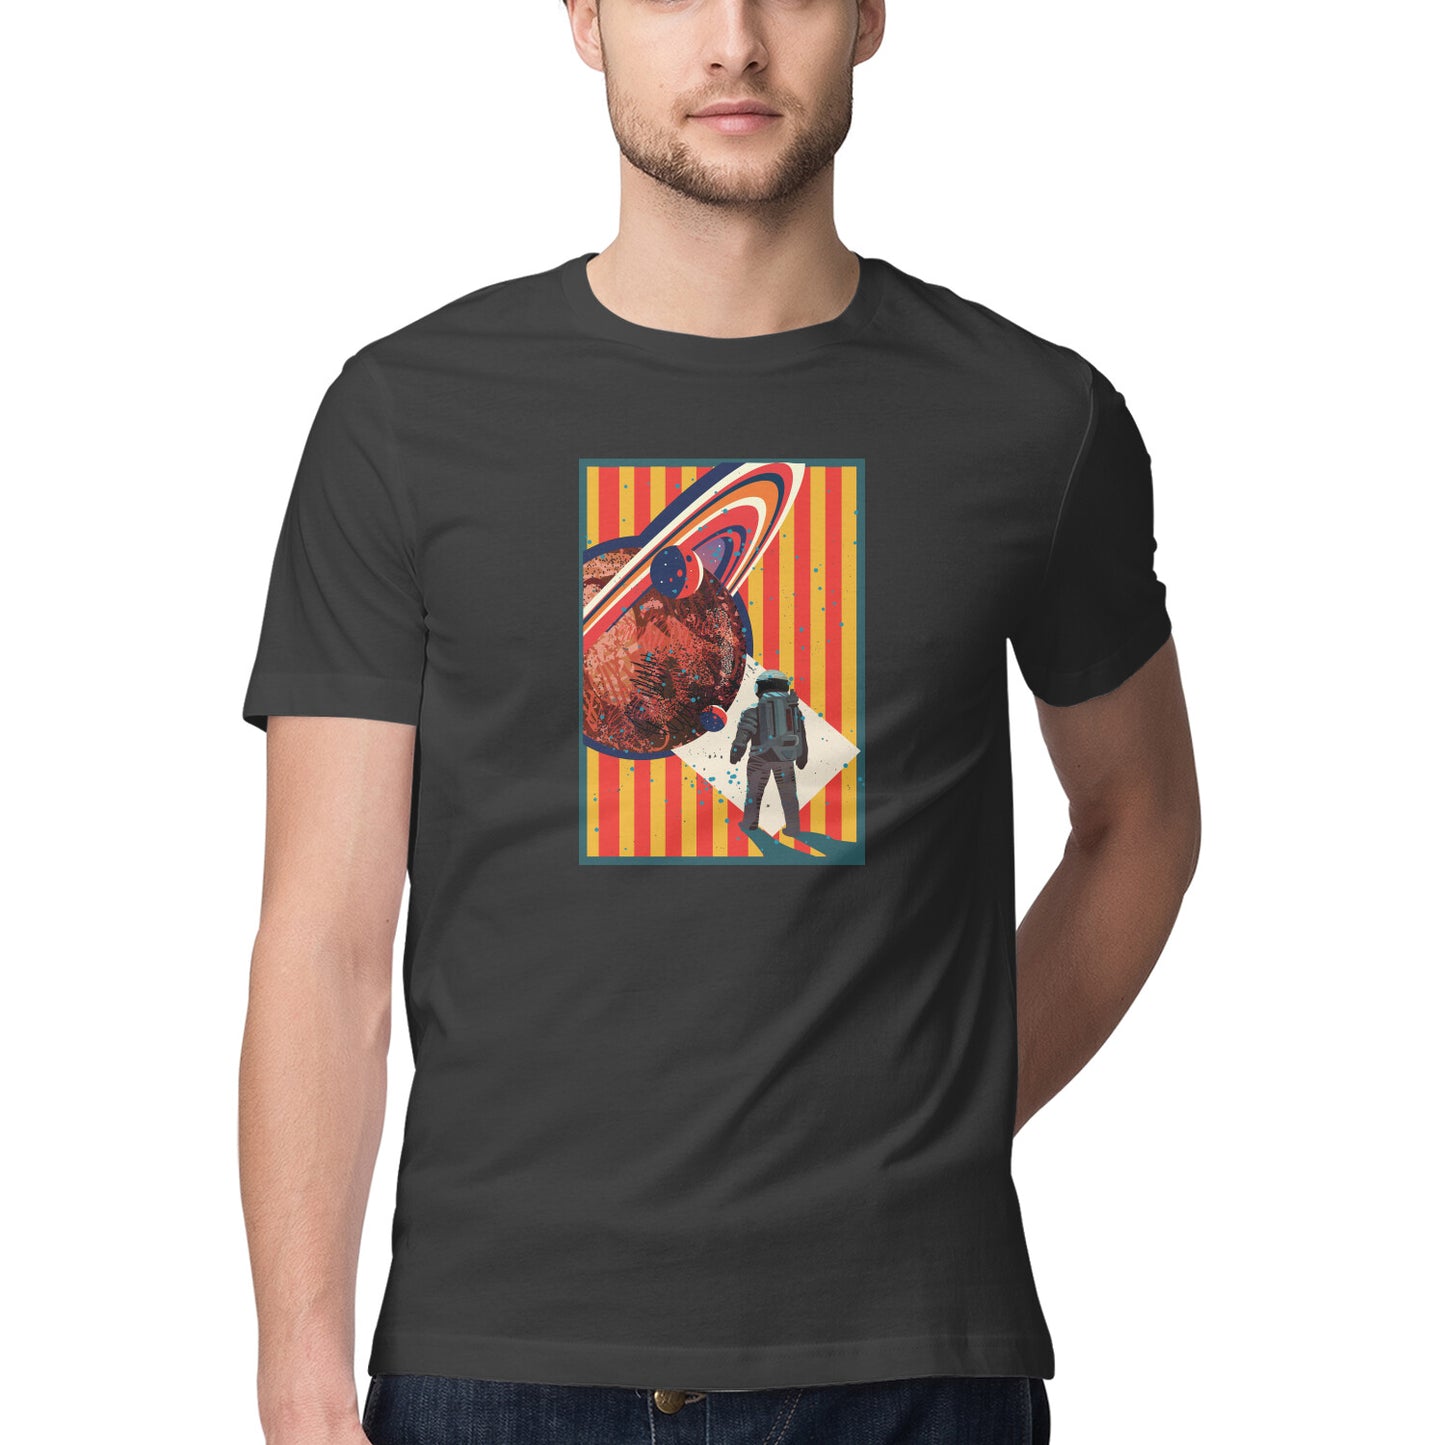 Space Art 07 Printed Graphic T-Shirt